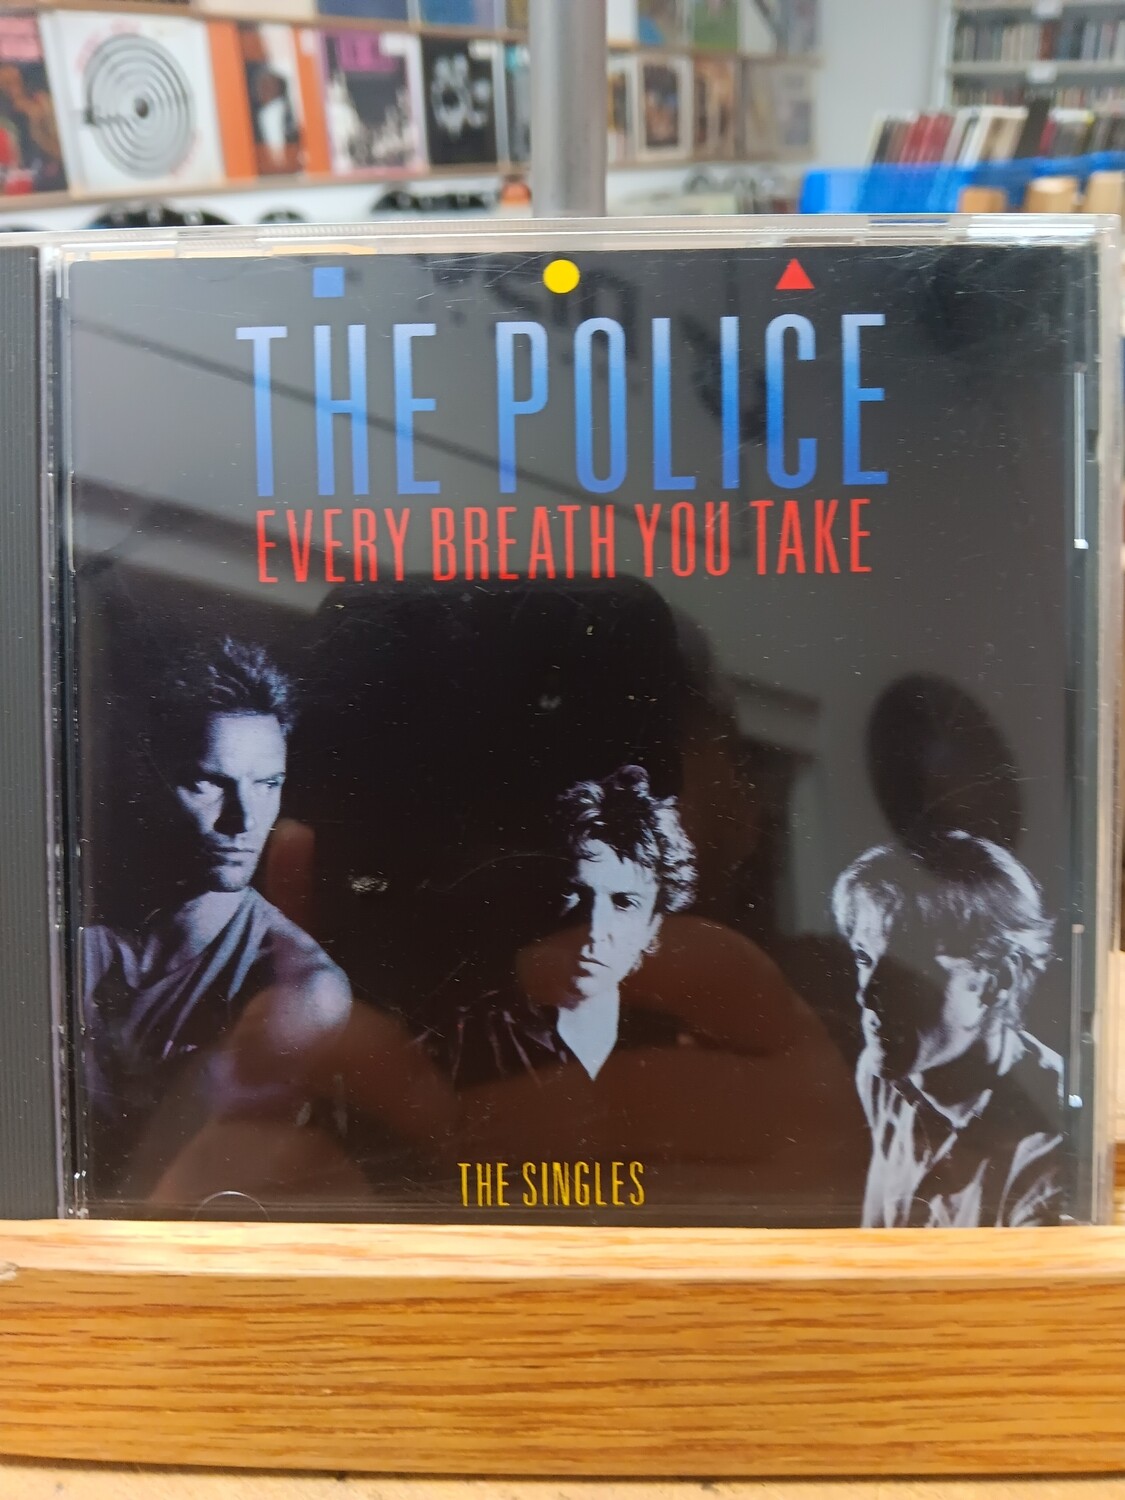 THE POLICE - Every Breath You Take, The Singles (CD)